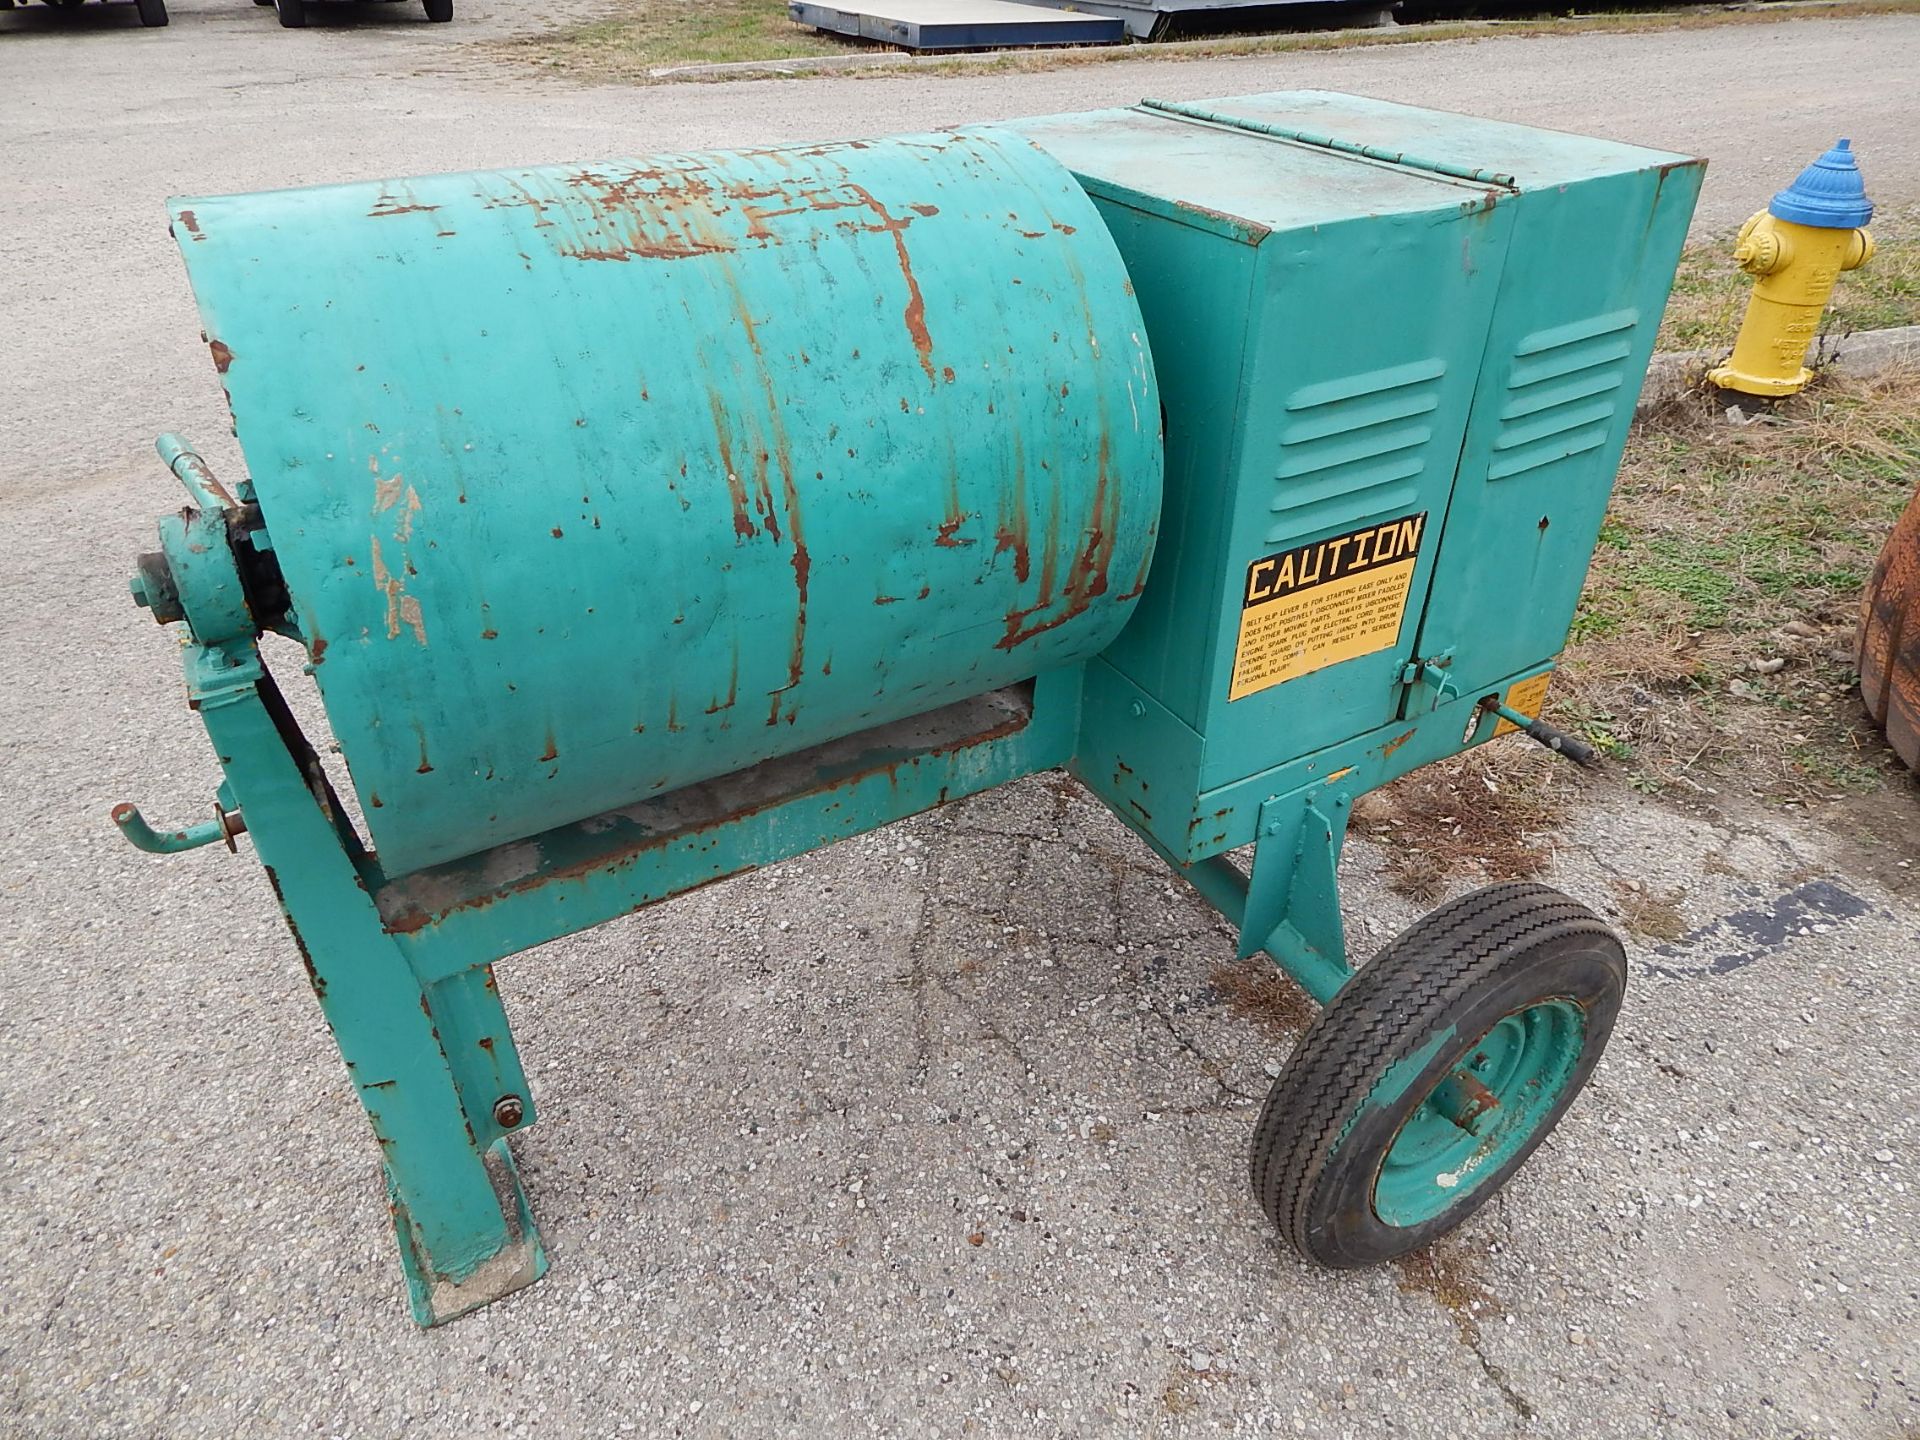 Stow Model 20 B Gas-Powered Mortar Mixer s/n 8605439, Briggs & Stratton 7 HP Engine - Image 4 of 5